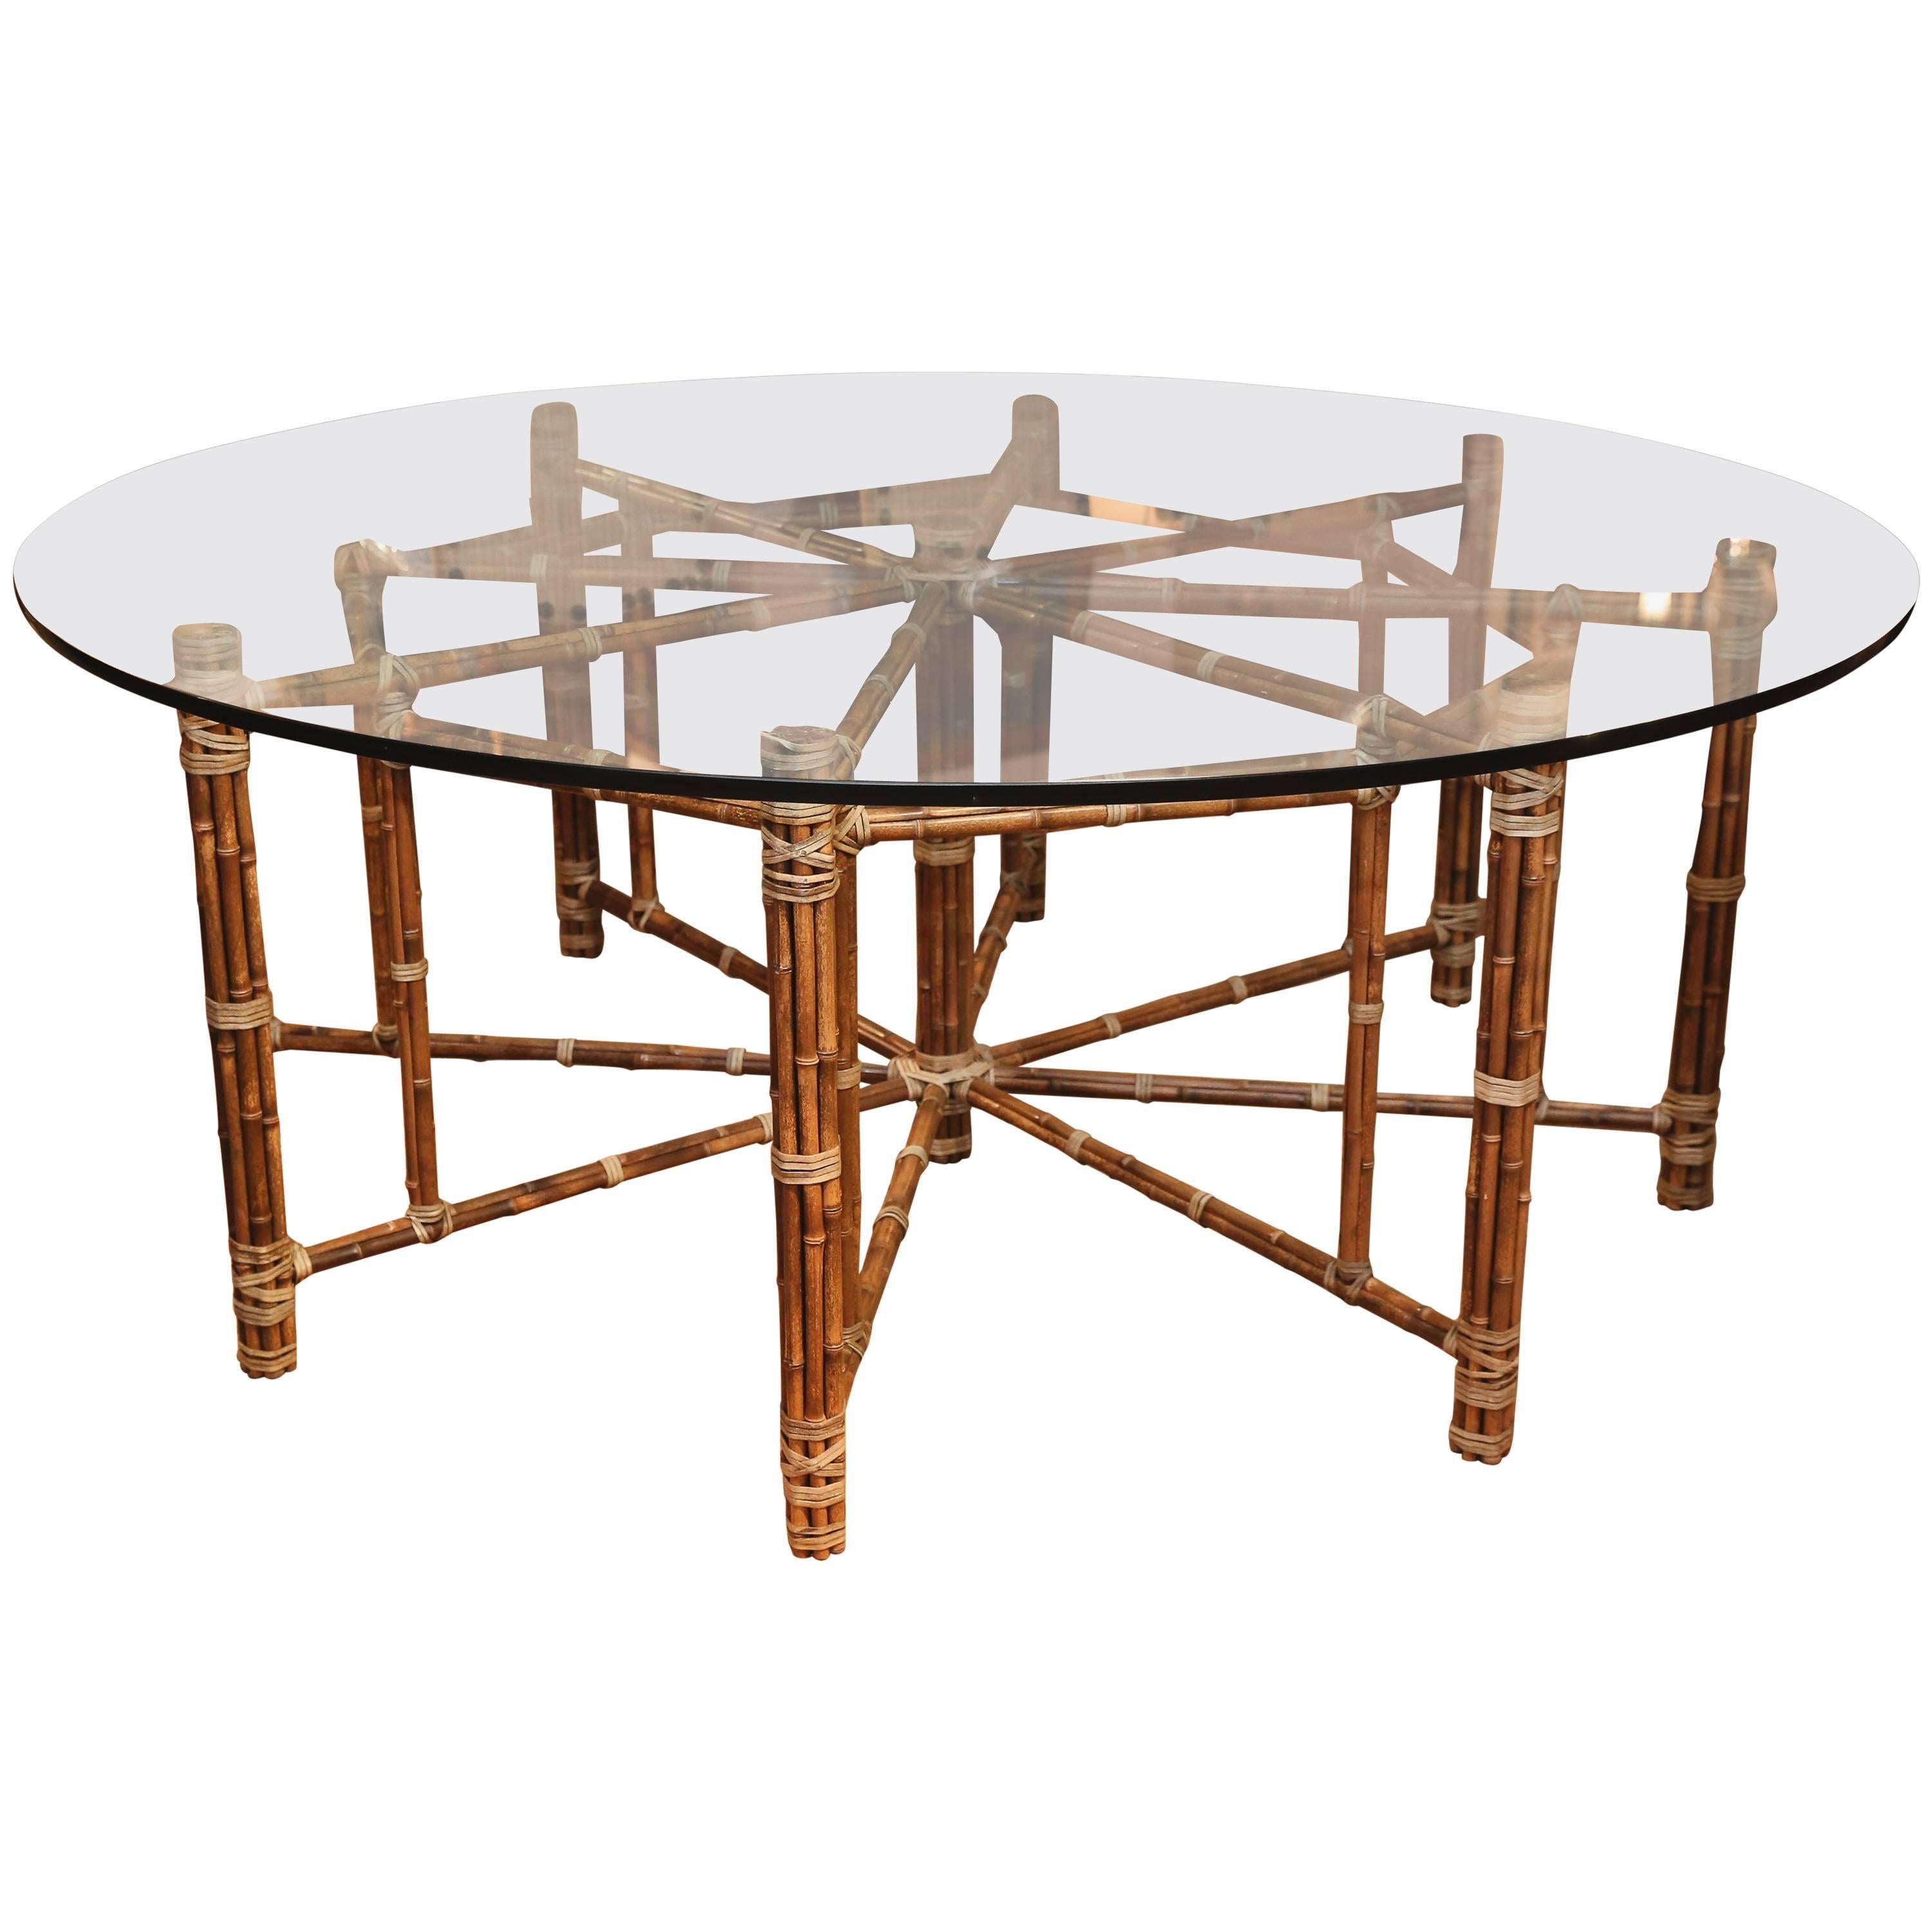 McGuire Octagon Bamboo Dining Table with Round Top